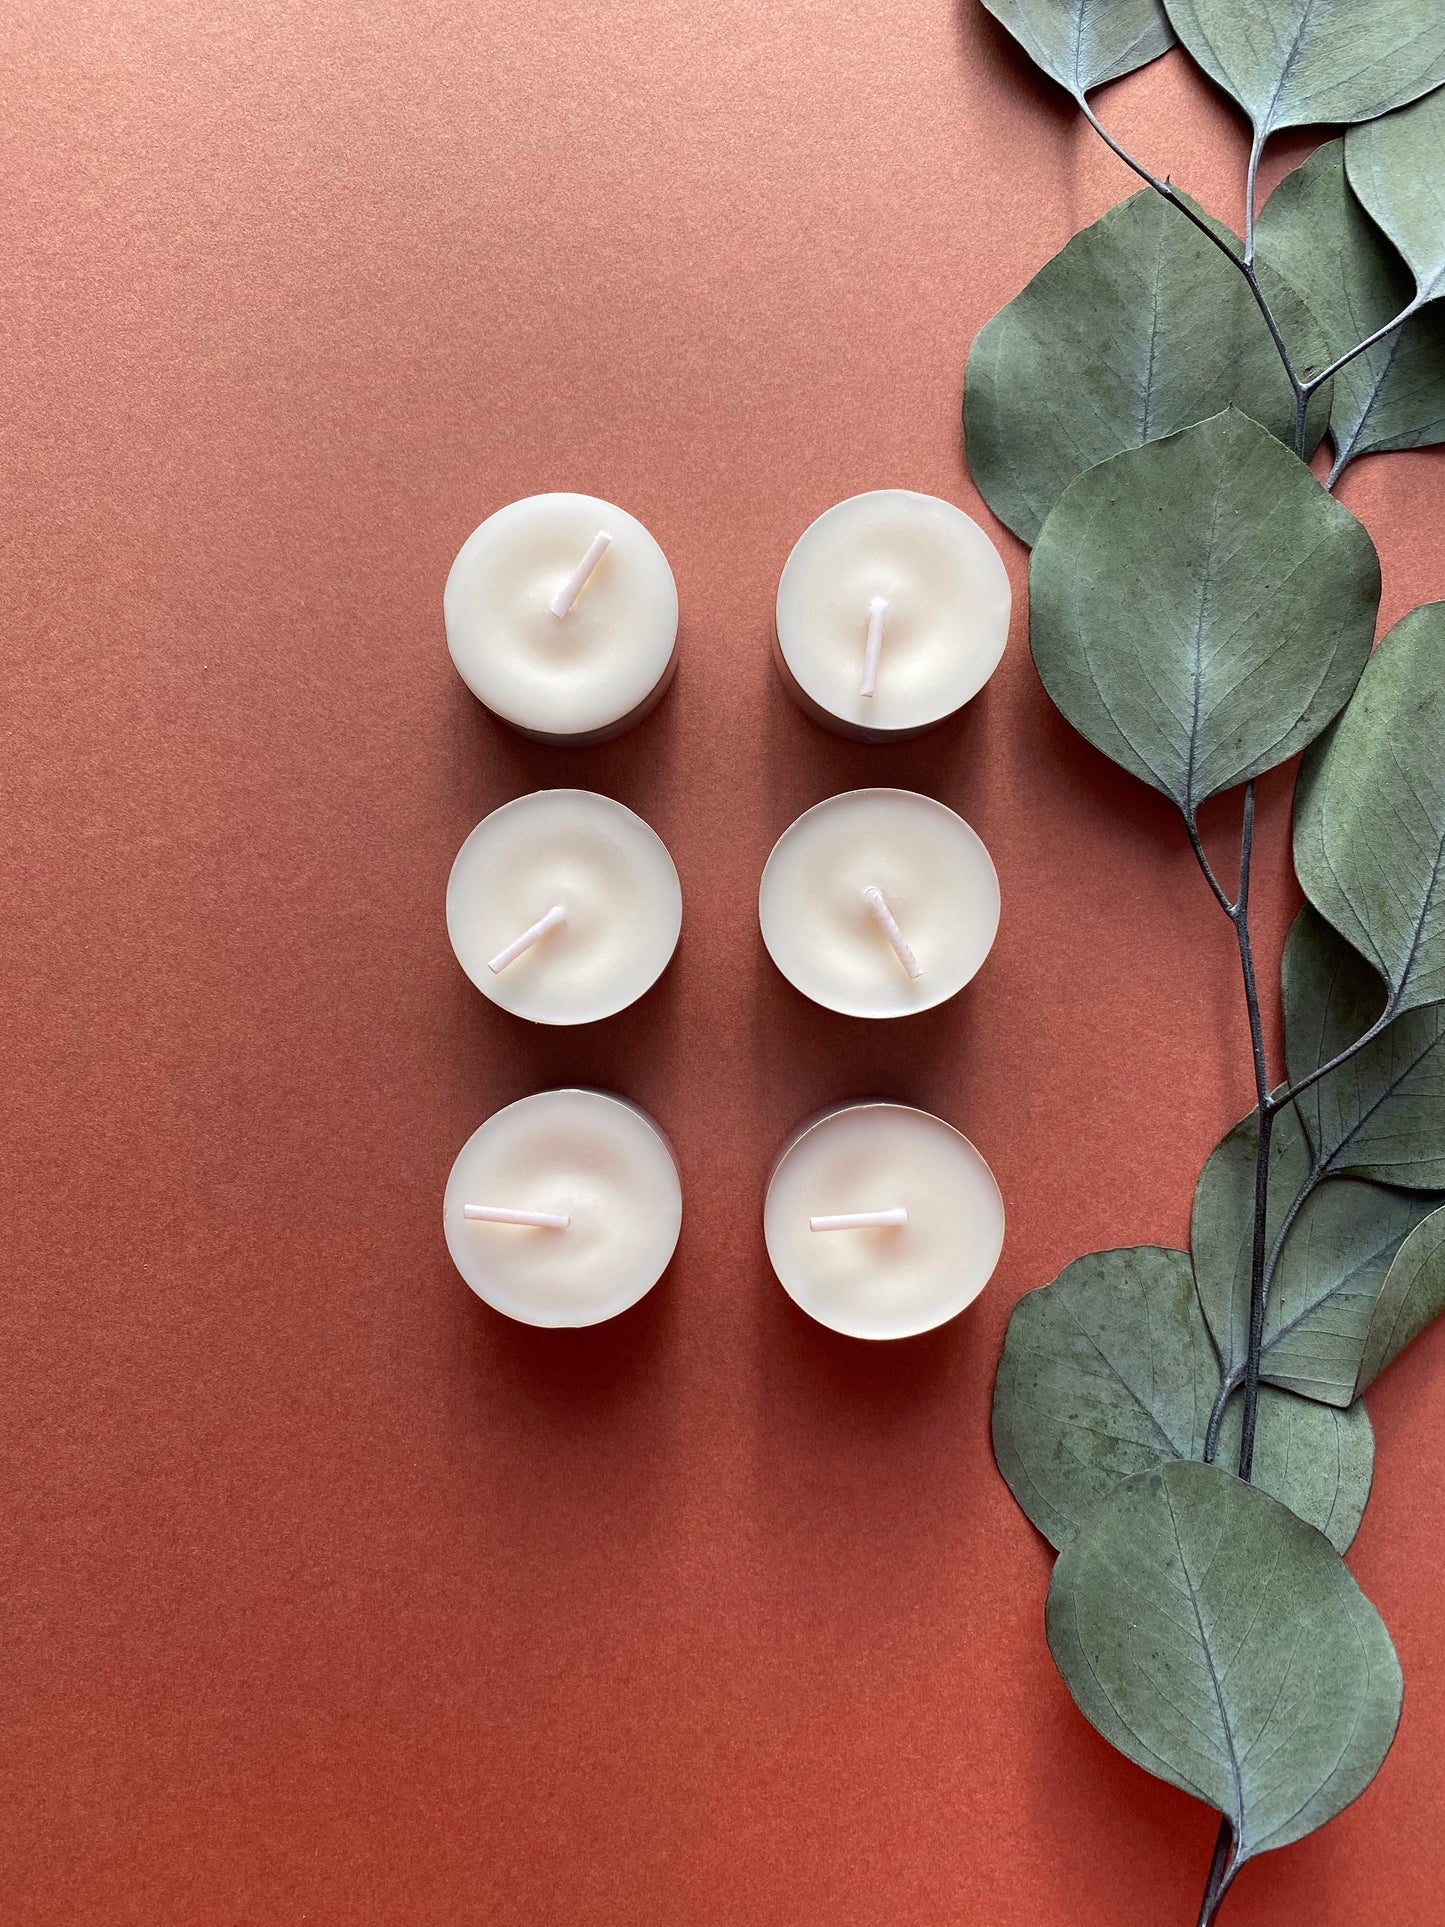 6 Lunette-Little Moon - Scented Aromatherapy Tealights